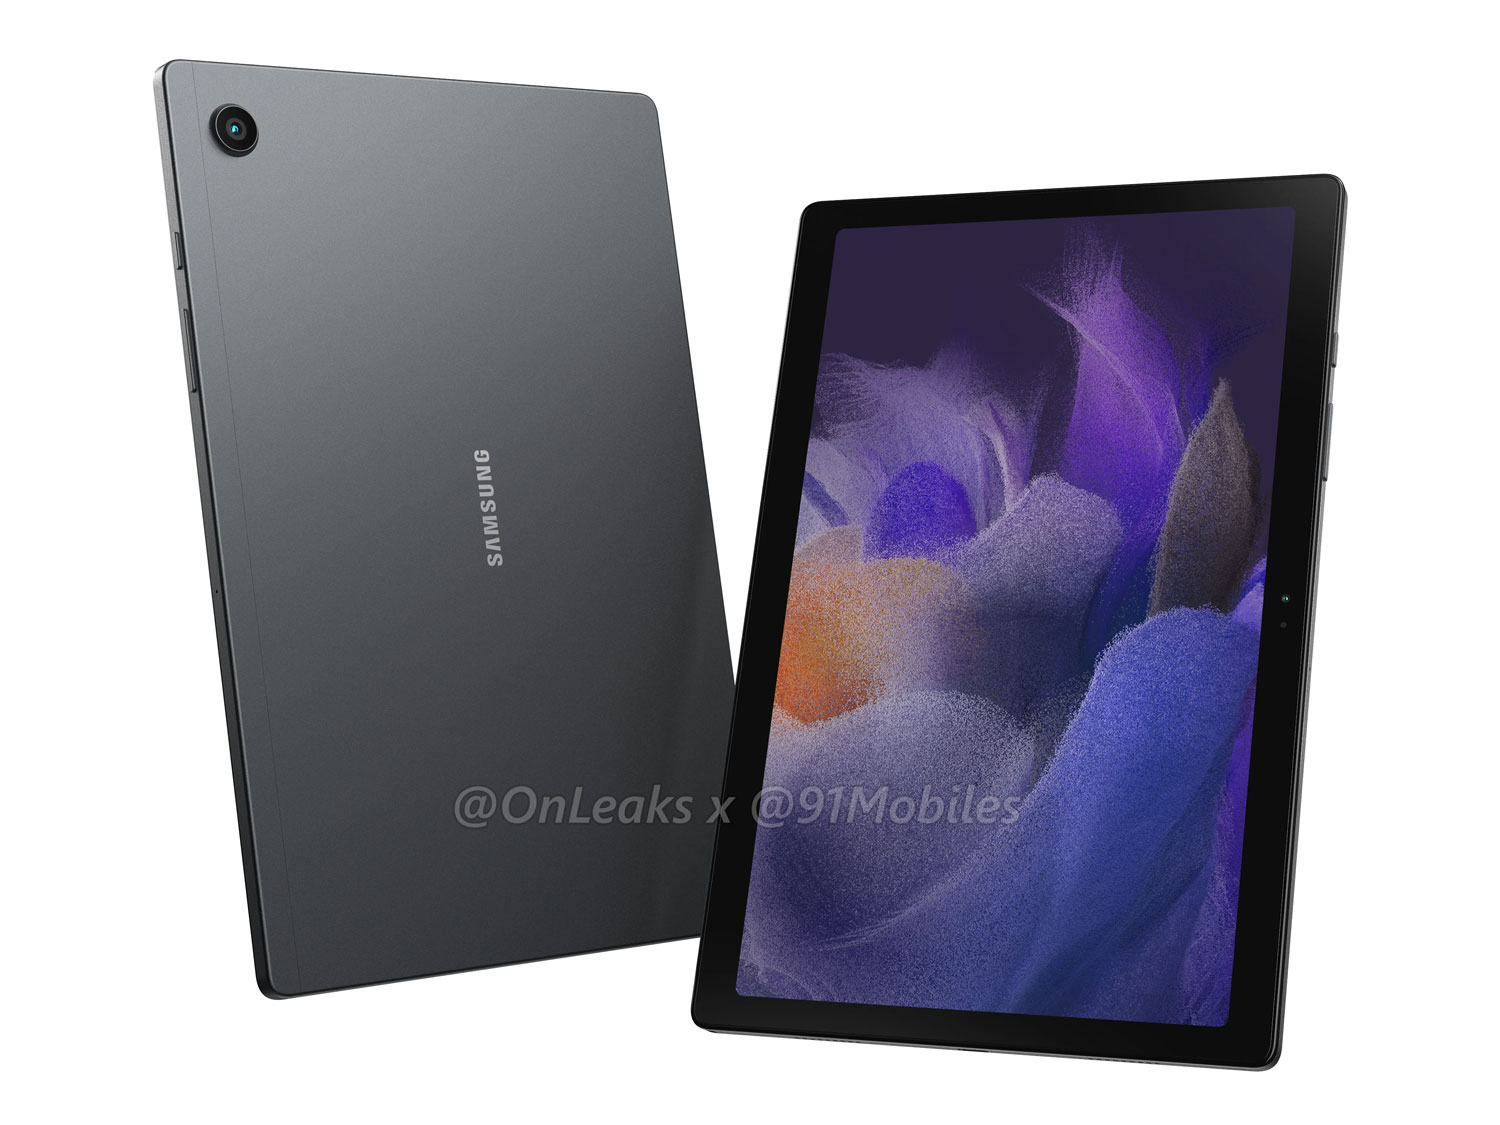 Samsung Galaxy Tab A8 2021 leaks with a simplistic and outdated design -   News